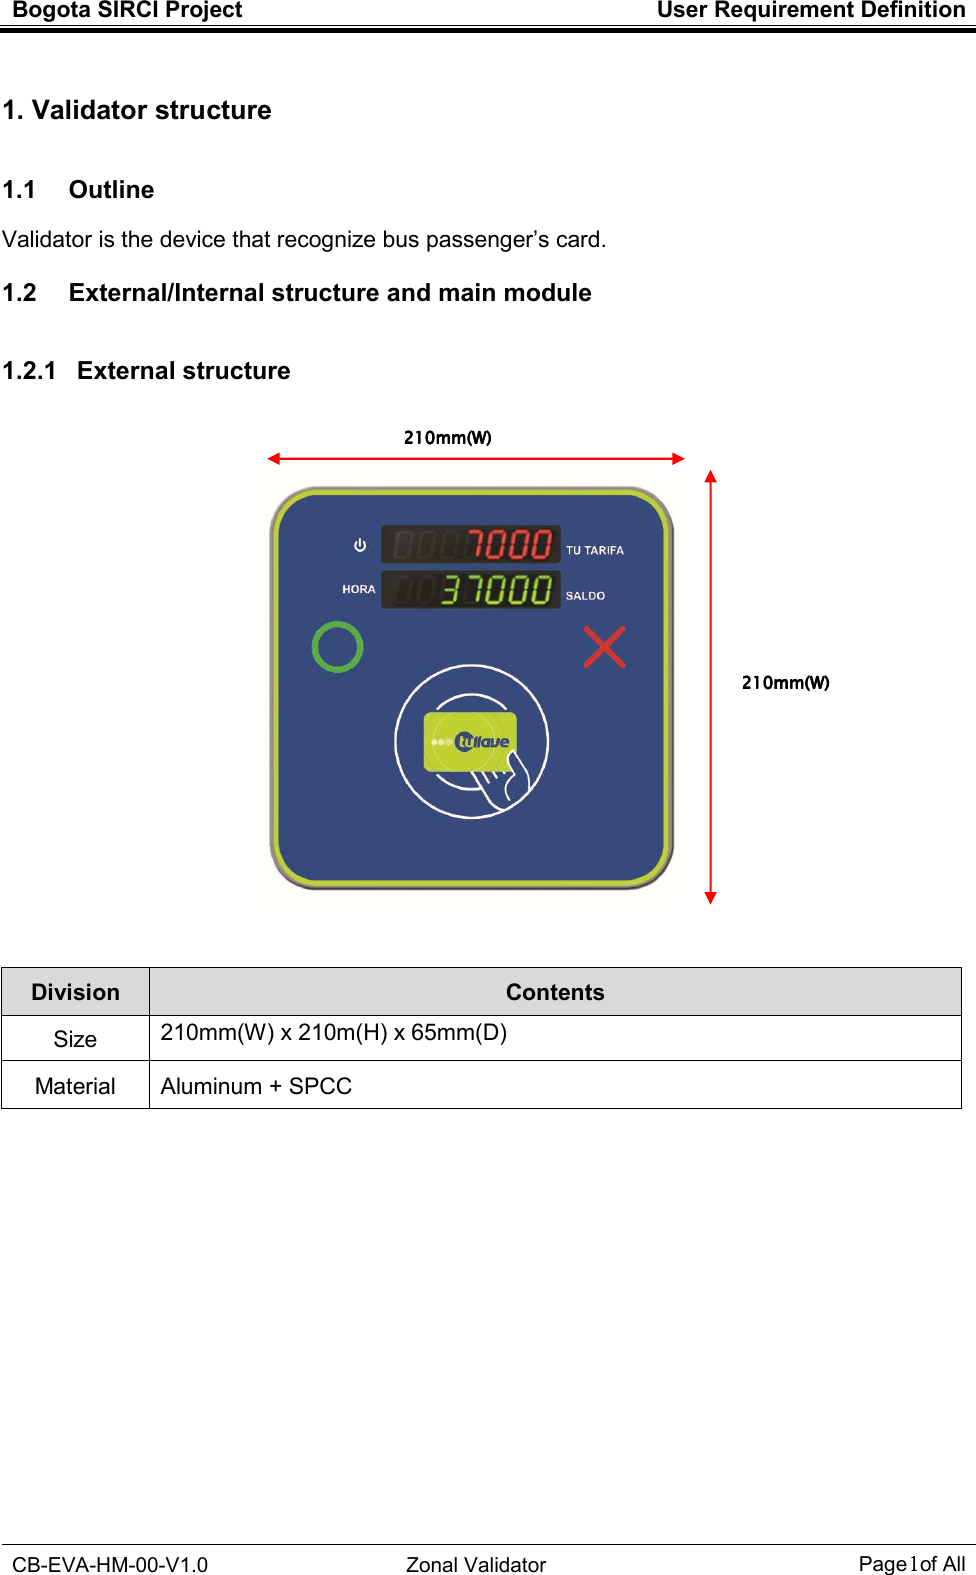 Bogota SIRCI Project  User Requirement Definition  CB-EVA-HM-00-V1.0  Zonal Validator Page１１１１ of All  1. Validator structure 1.1     Outline Validator is the device that recognize bus passenger’s card. 1.2     External/Internal structure and main module 1.2.1   External structure      Division  Contents Size 210mm(W) x 210m(H) x 65mm(D) Material Aluminum + SPCC 210210210210mmmmmmmm(W)(W)(W)(W)    210210210210mmmmmmmm(W)(W)(W)(W)    